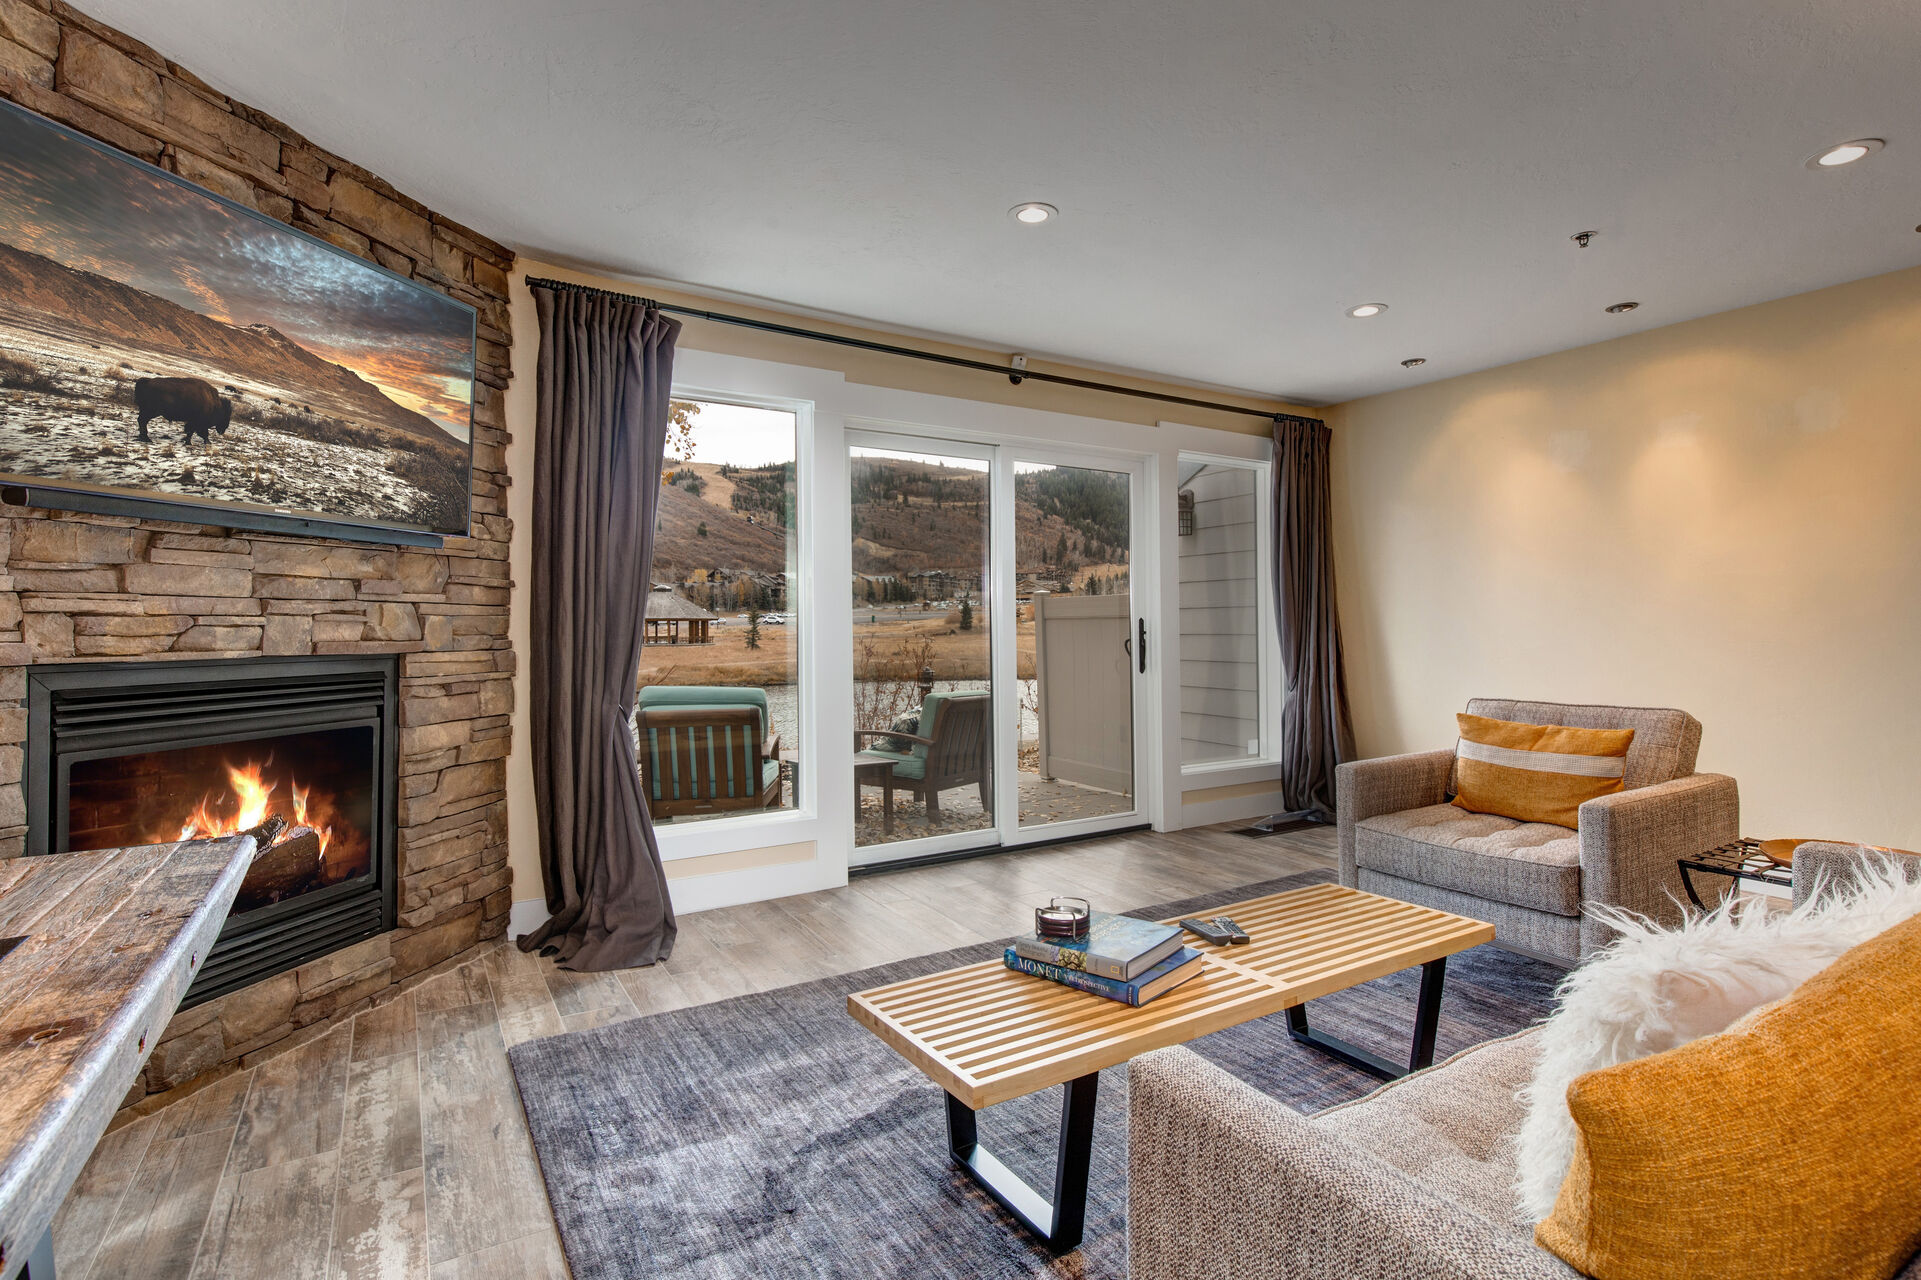 Living Room with stunning view of Deer Valley mountain and pond